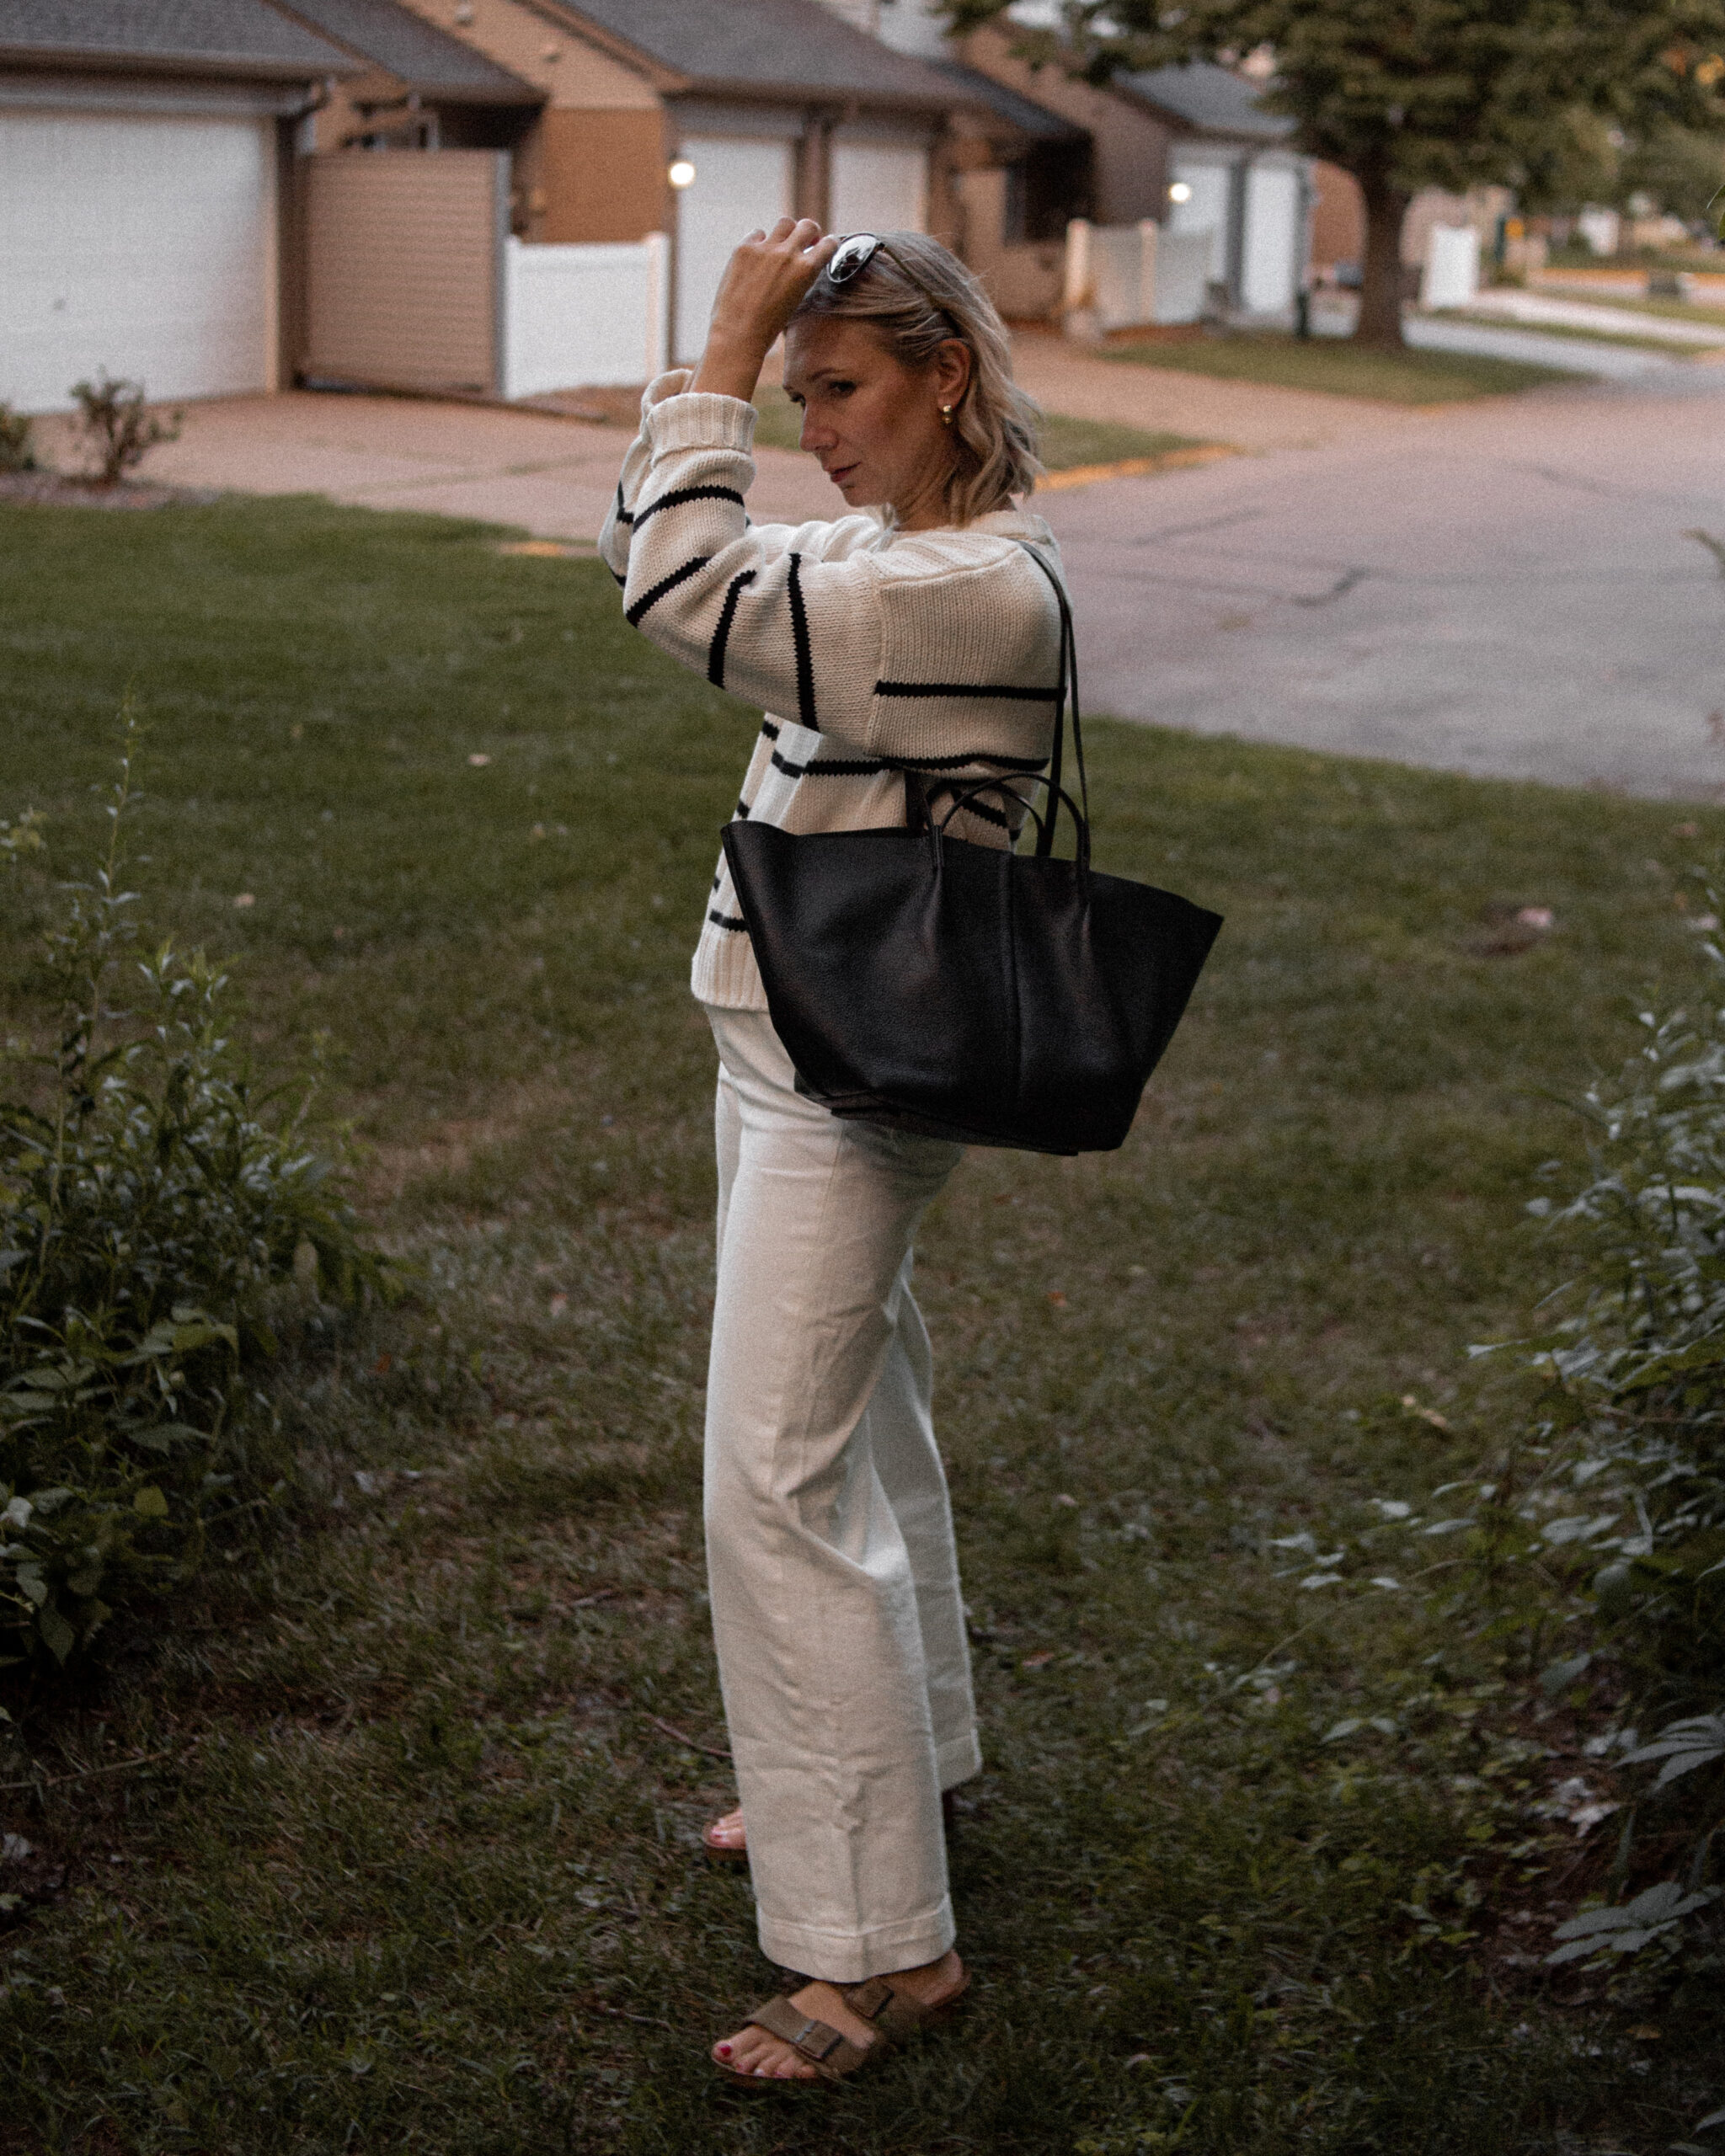 Karin Emily wears a jenni kayne striped sweater, white wide leg pants, birkenstock arizona sandals and a black bag from the Nordstrom Anniversary Sale